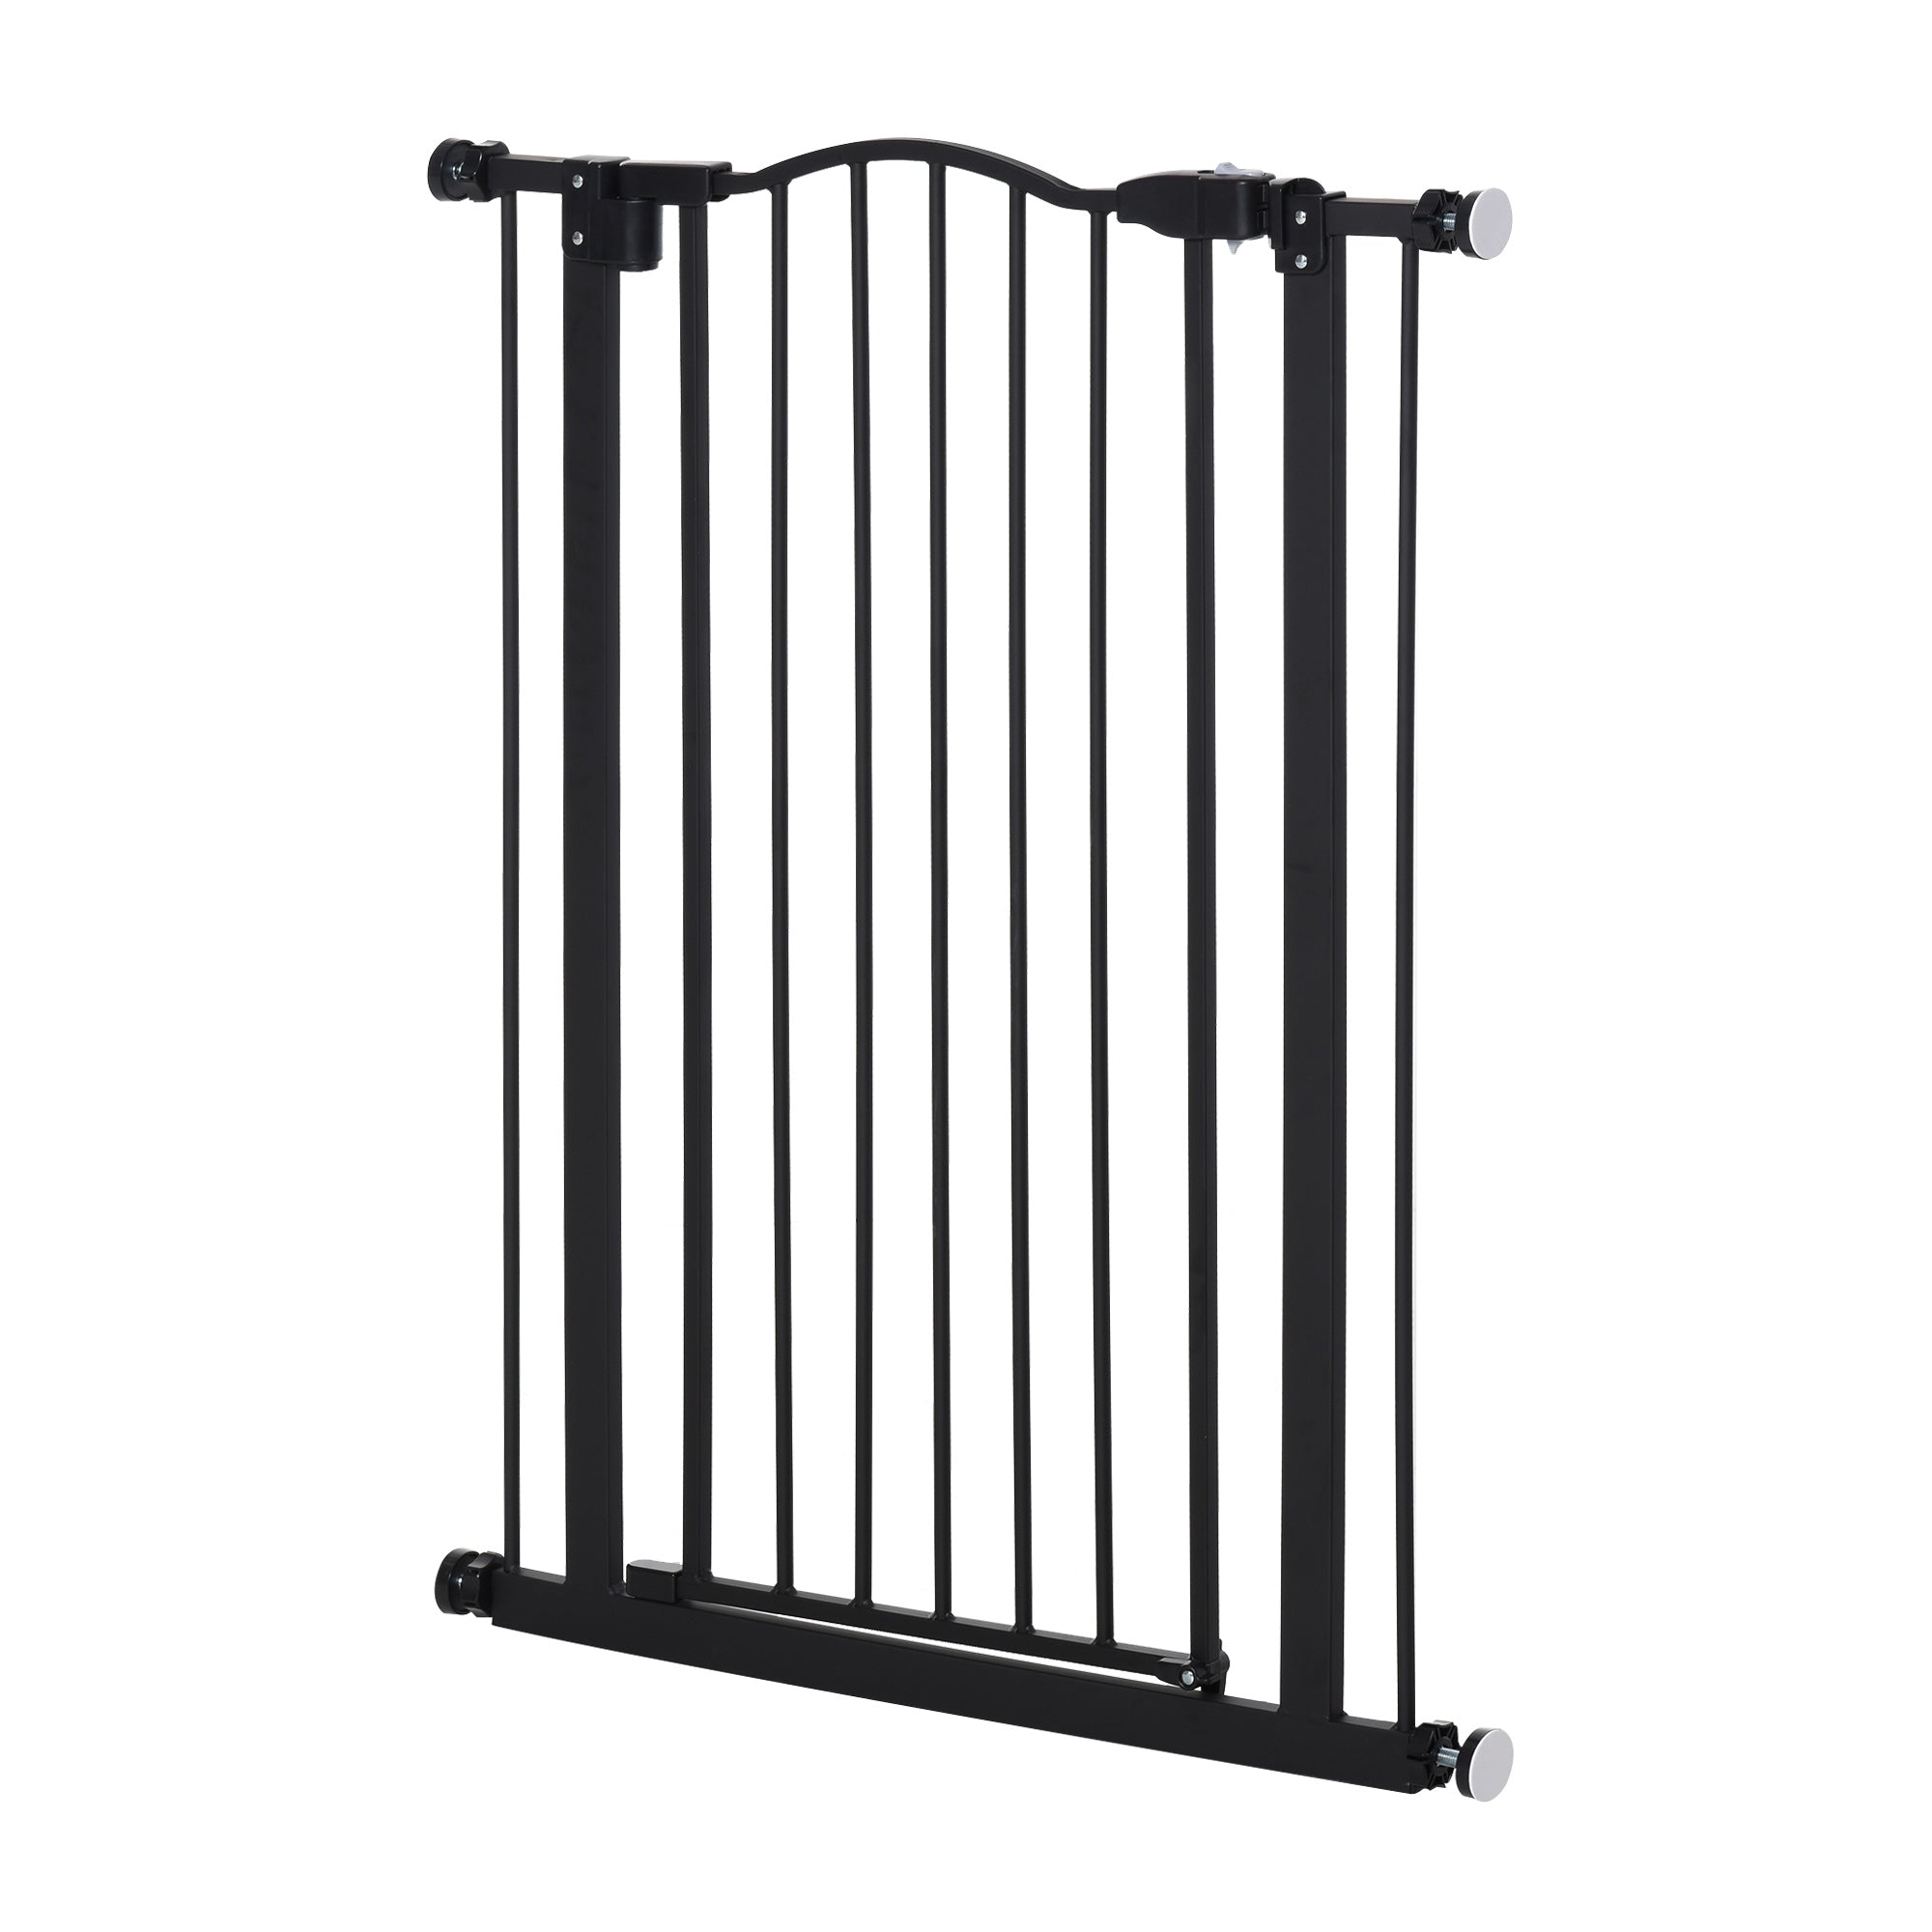 PawHut 74-84cm Adjustable Metal Pet Gate Safety Barrier w/ Auto-Close Door Double Locking Easy-Open Doors Stairs Home Frames Black - Inspirely